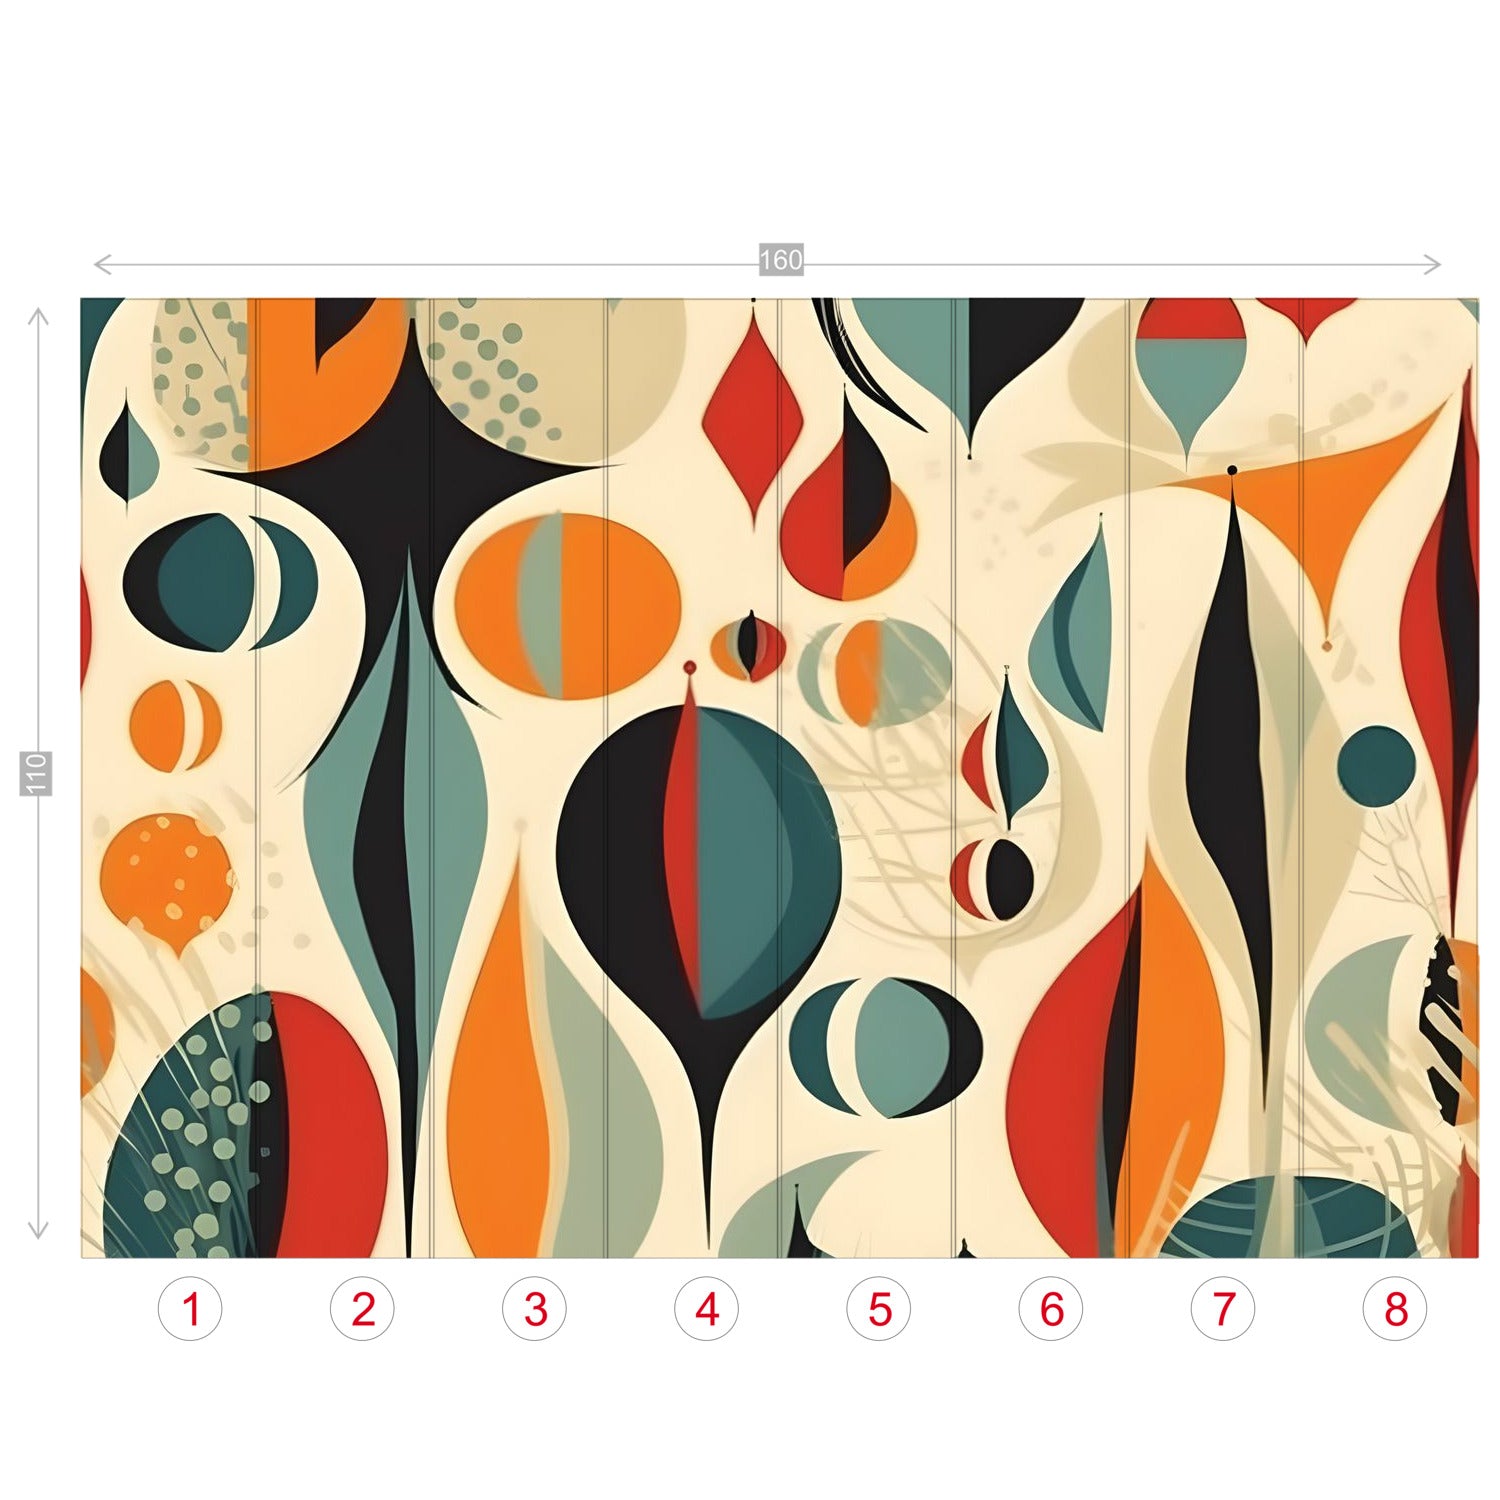 Mid Century Mod Wallpaper, Peel And Stick, Abstract, Geometric Retro Wall Murals